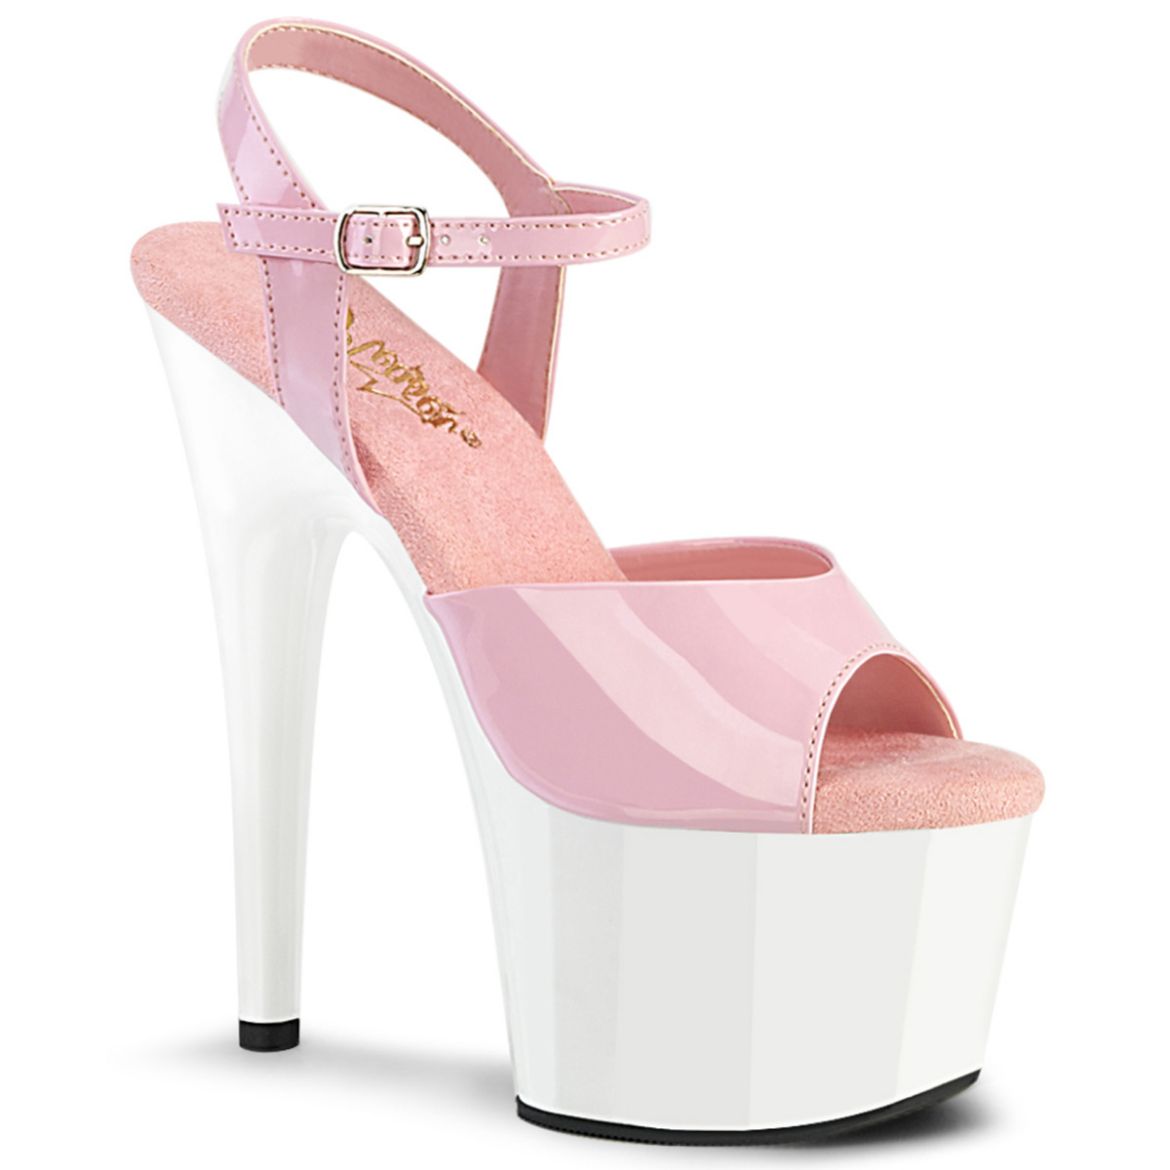 Product image of Pleaser ADORE-709 B. Pink Pat/Wht 7 Inch Heel 2 3/4 Inch PF Ankle Strap Sandal